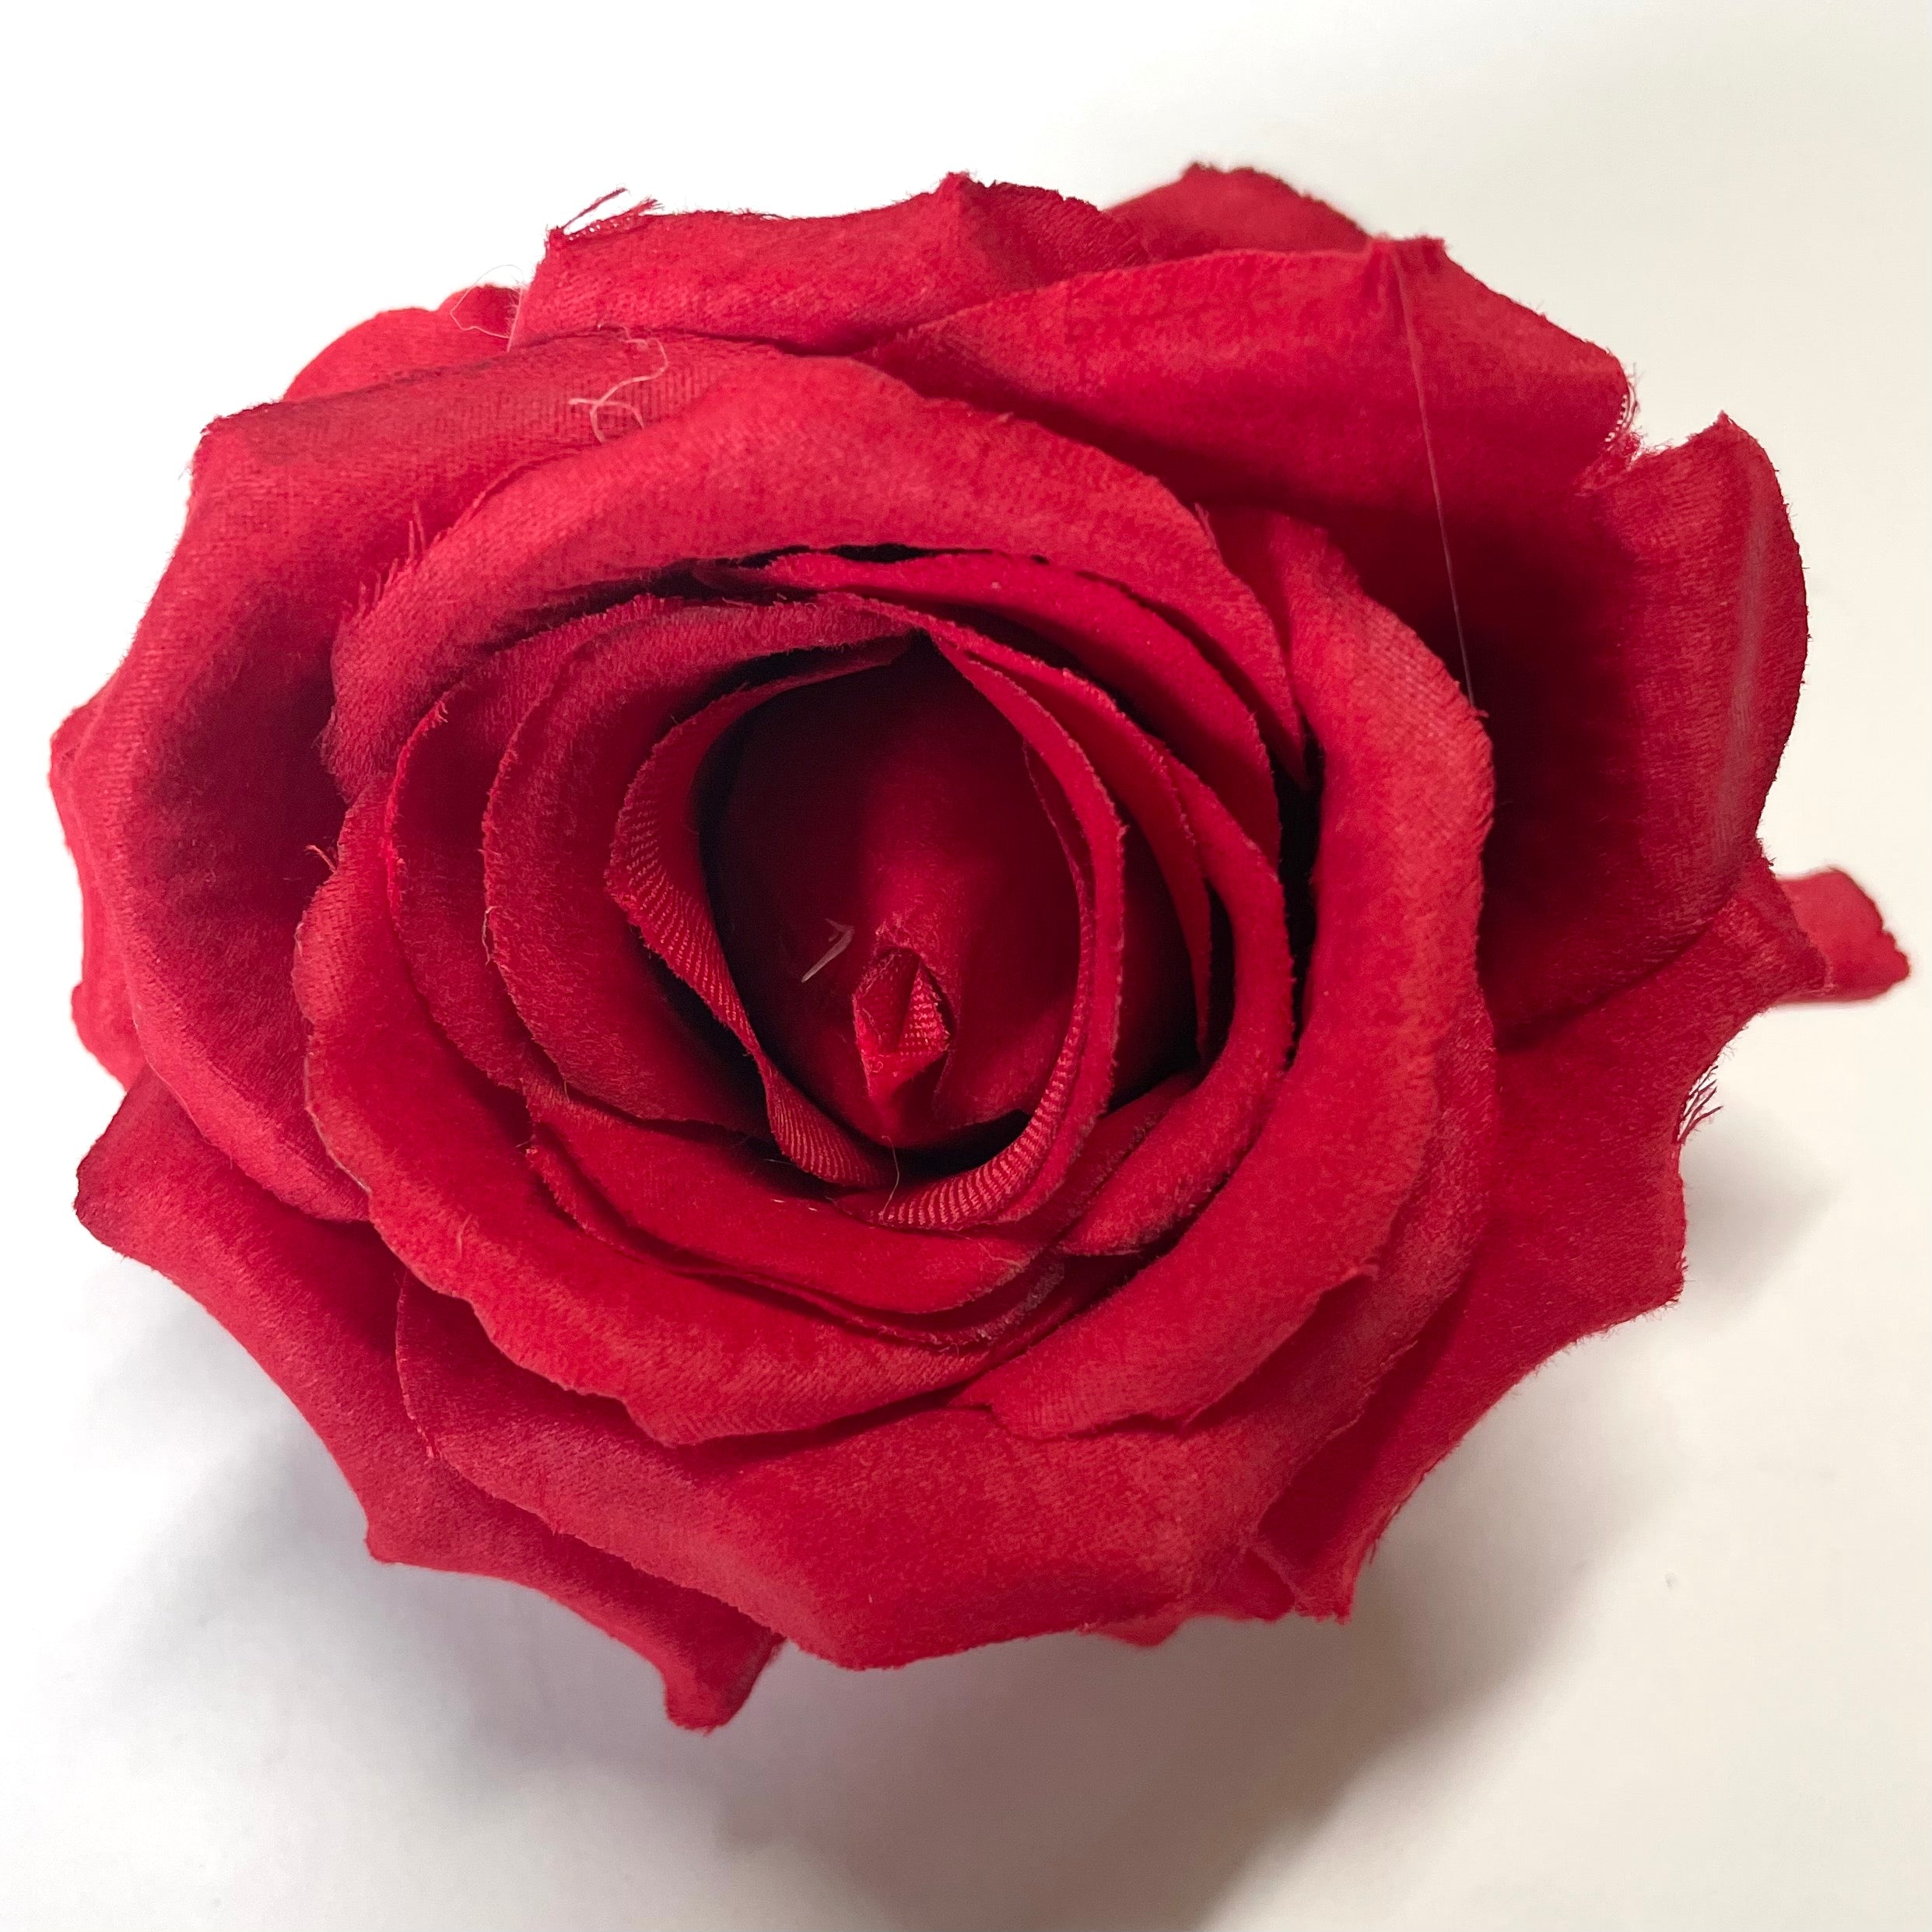 Artificial Silk Flower Head - Red Rose Style 119 - 1pc